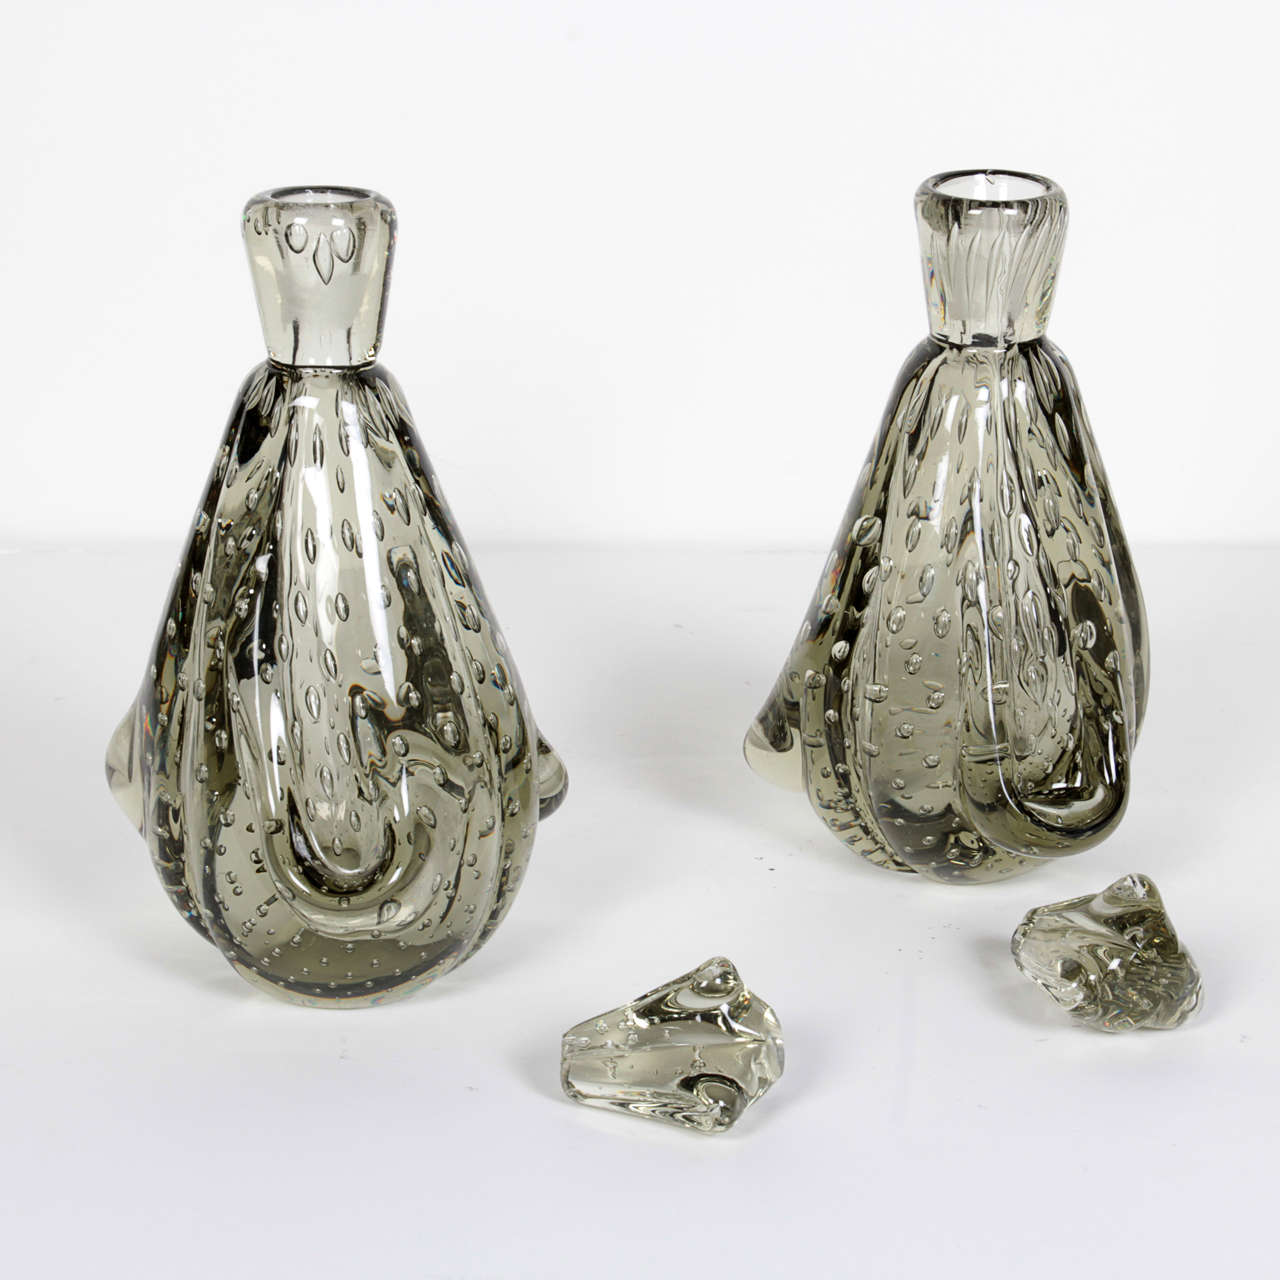 Exquisite Smoked Grey Murano Glass, Vanity or Perfume Set by Barovier & Toso 1